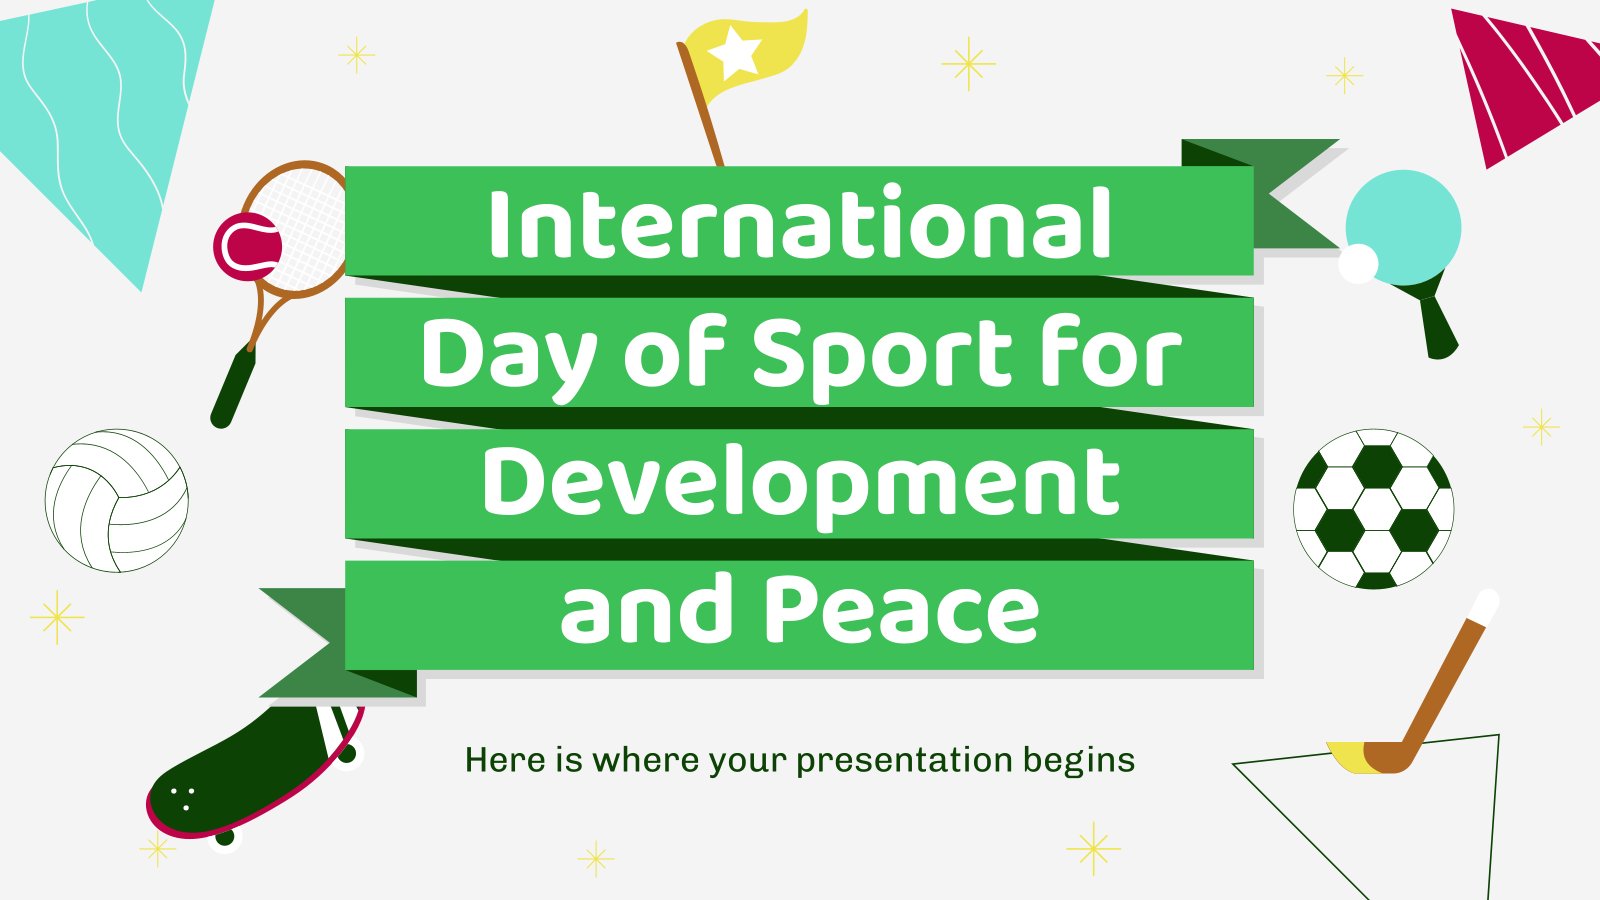 International Day of Sport for Development and Peace presentation template 